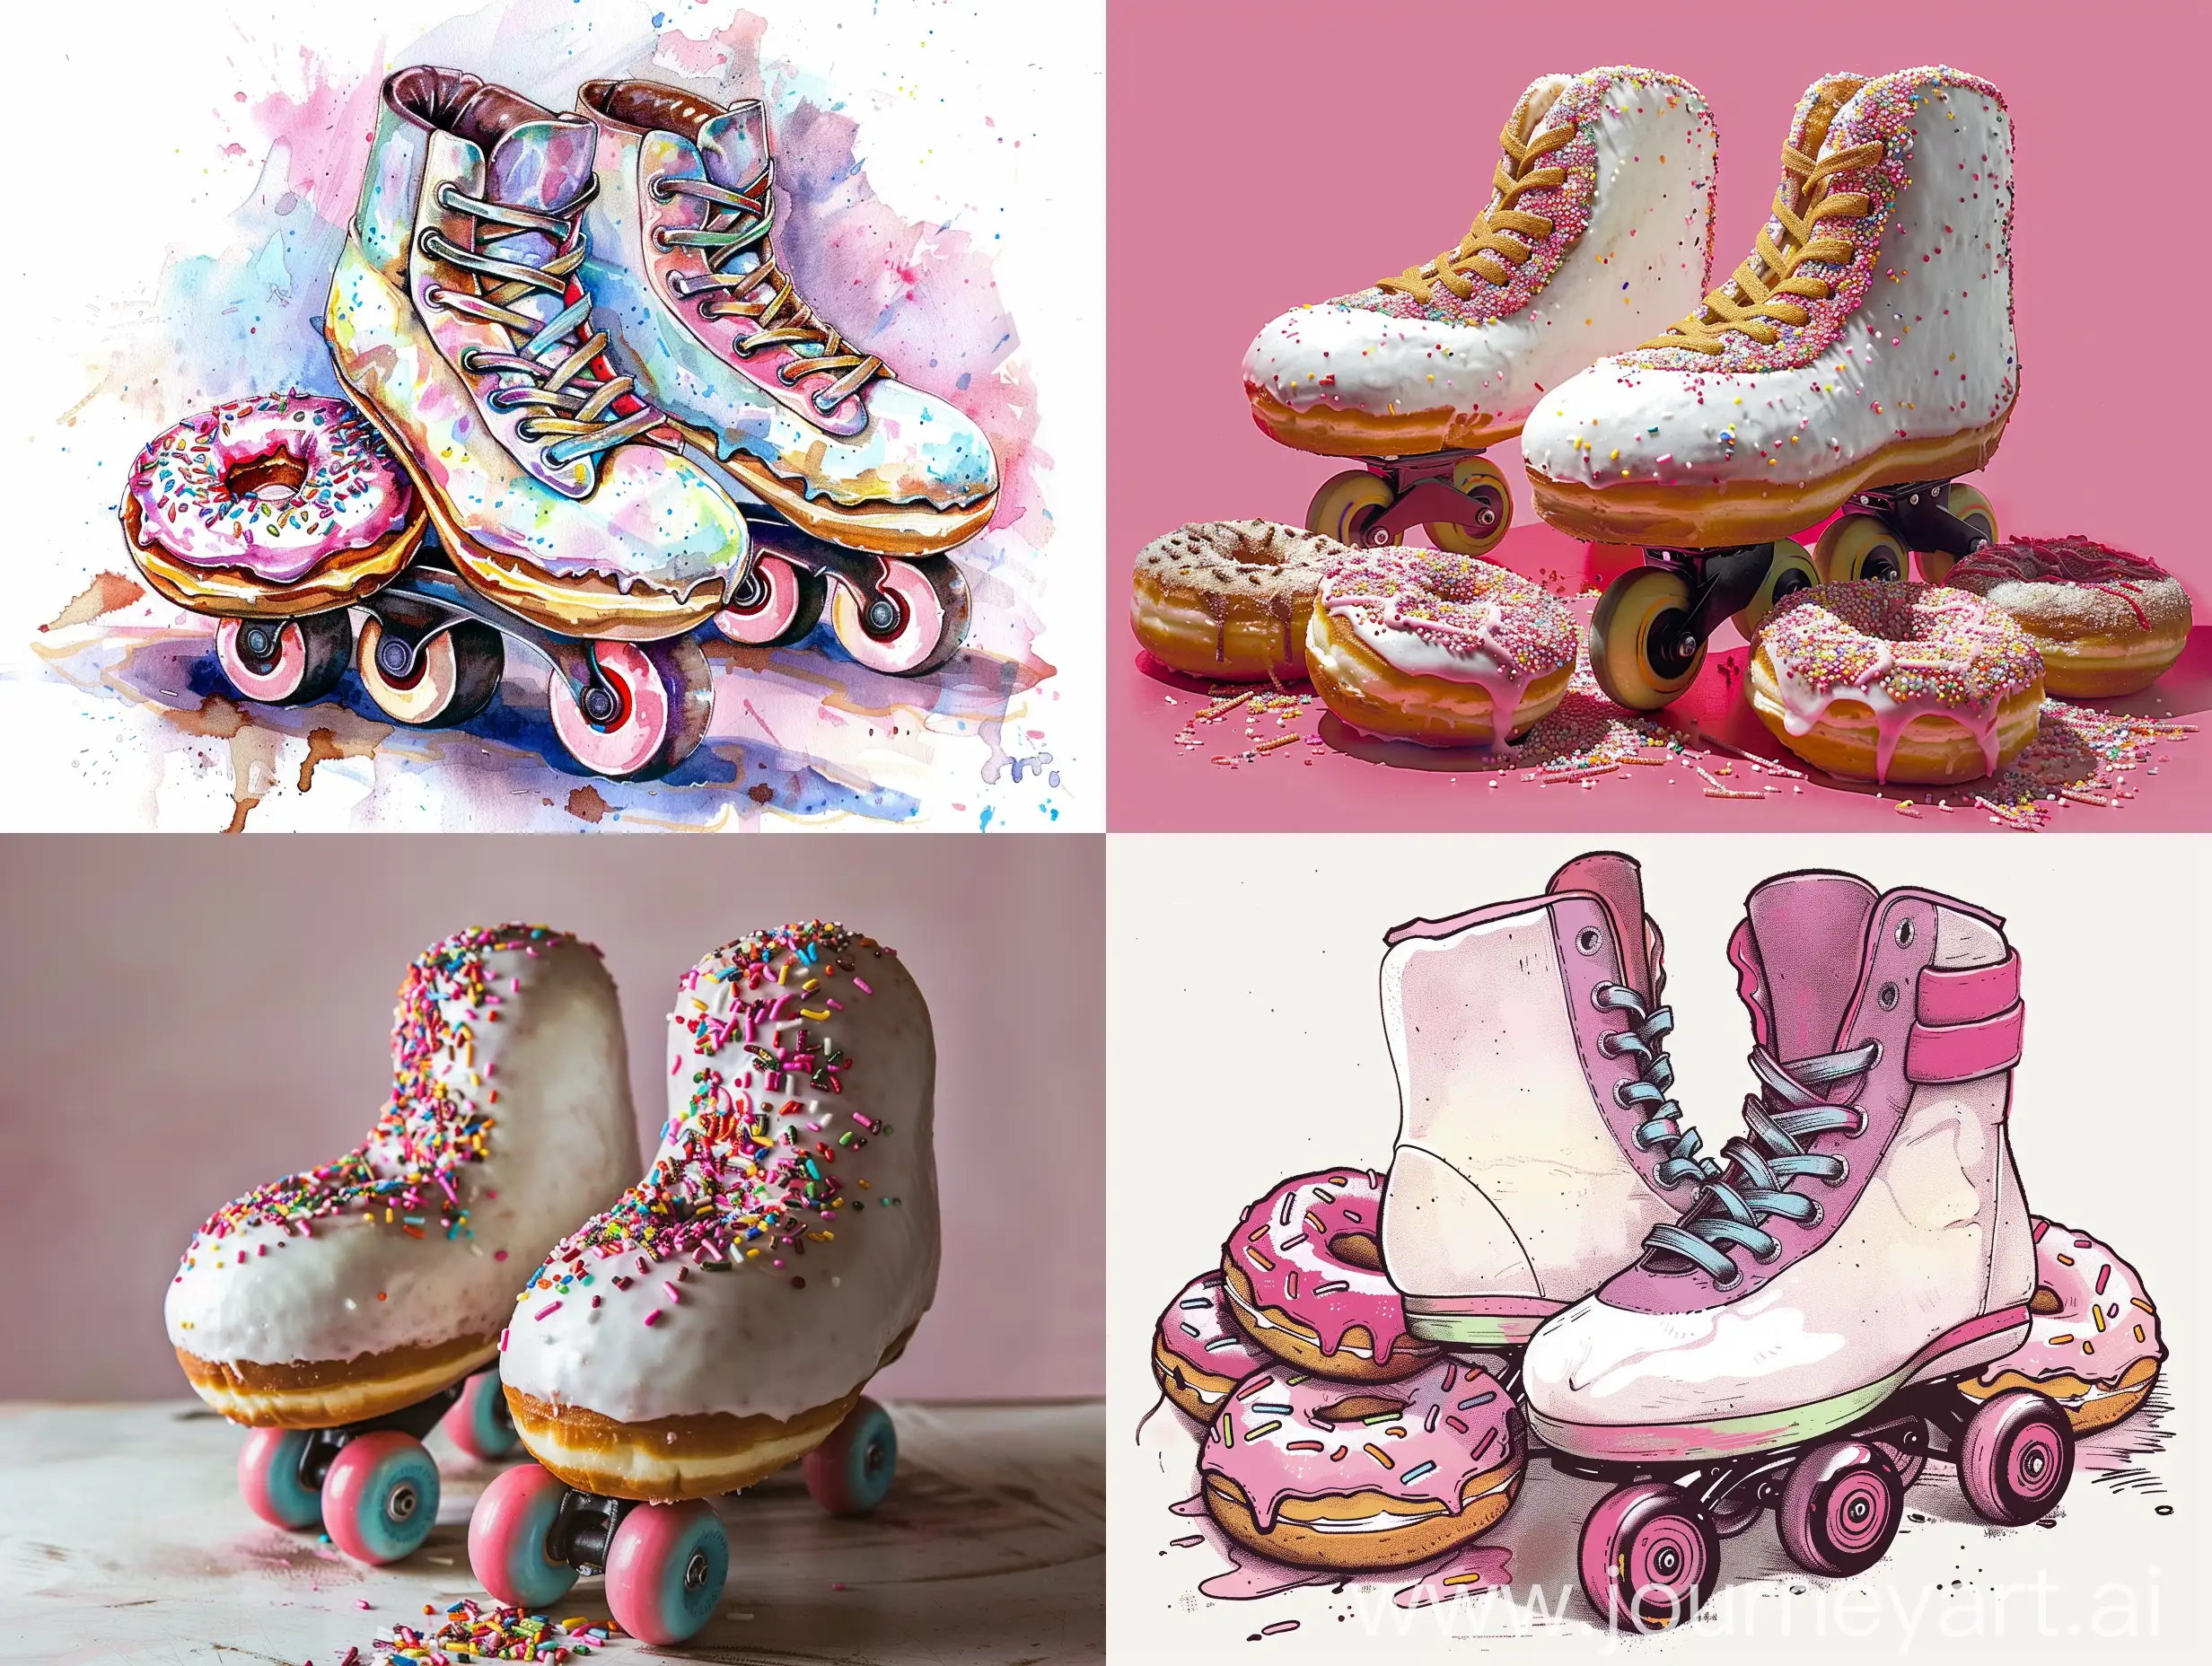 Joyful-Roller-Skating-with-Colorful-Donuts